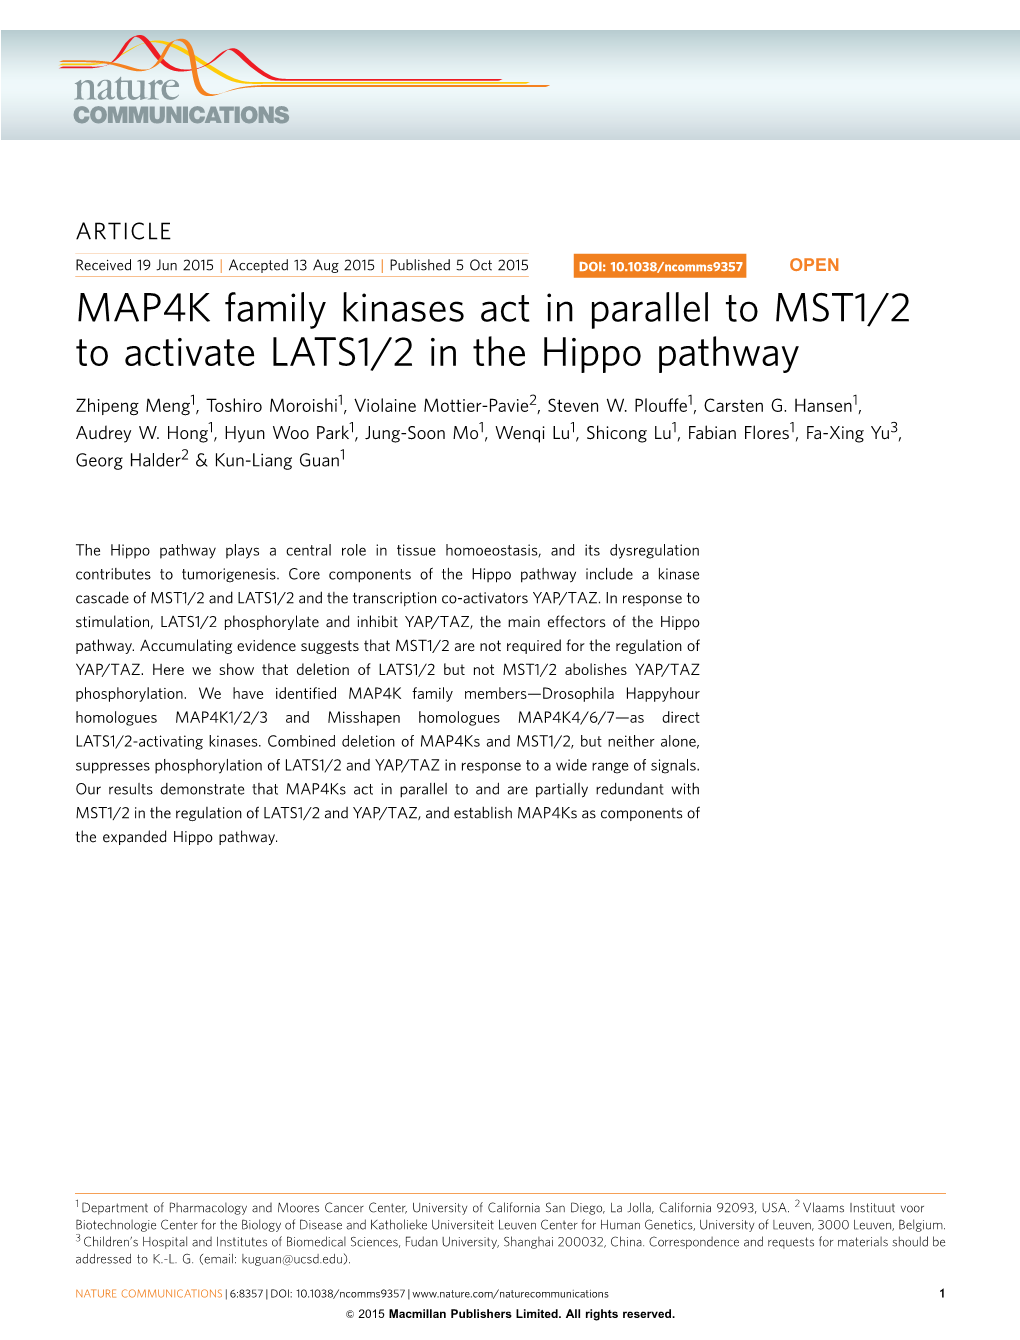 MAP4K Family Kinases Act in Parallel to MST1/2 to Activate LATS1/2 in the Hippo Pathway